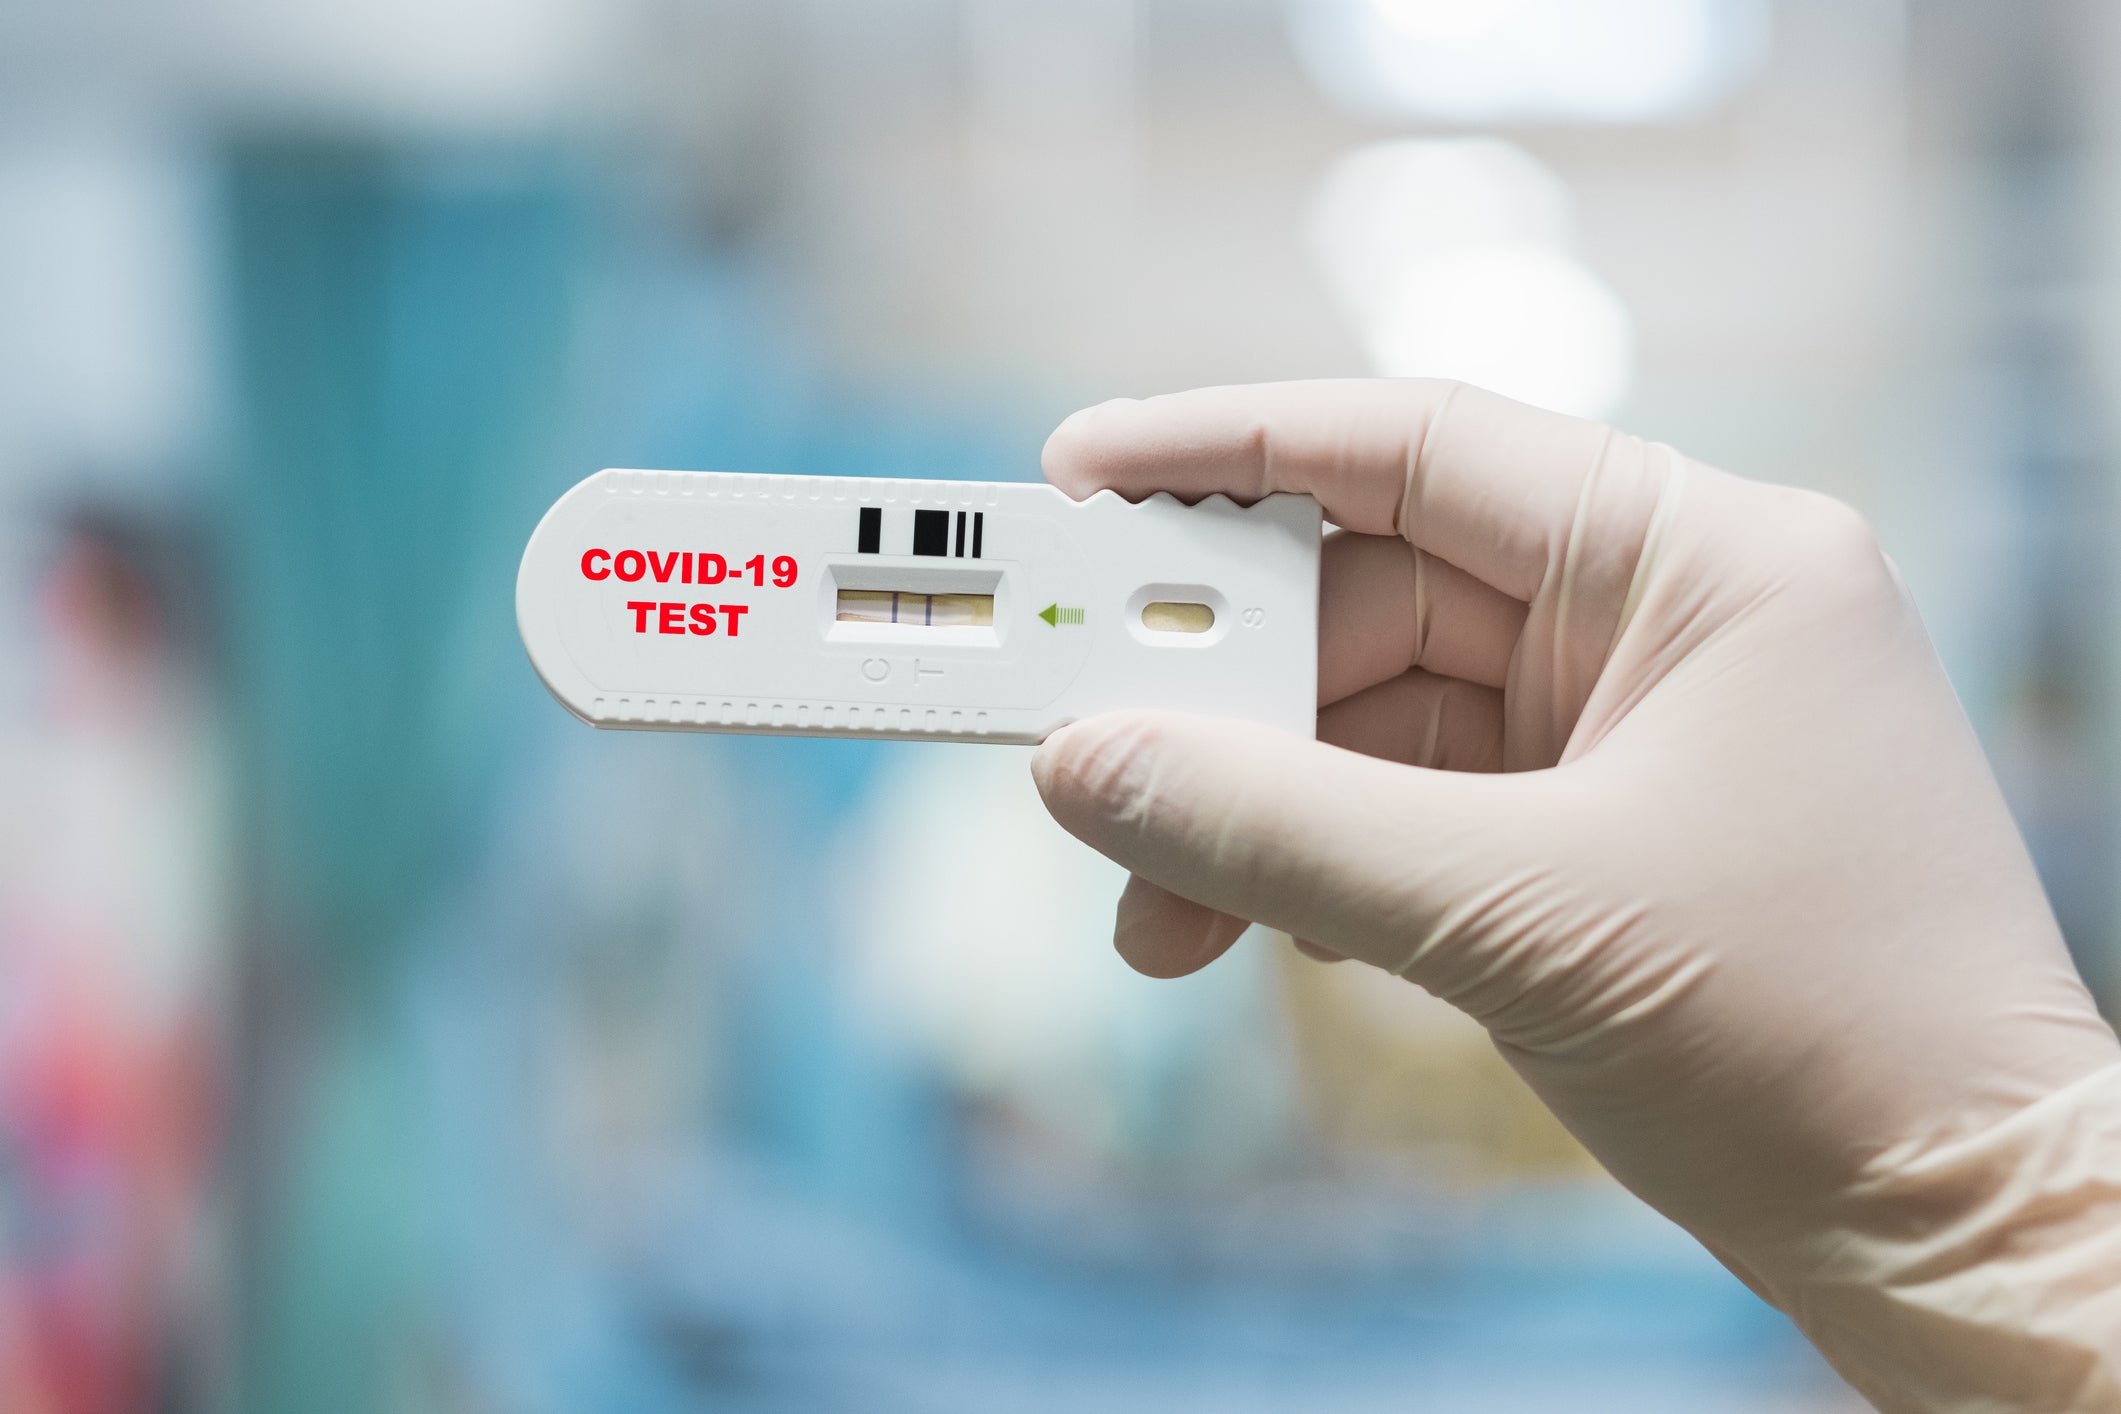 How to save money on pricey rapid COVID-19 PCR tests